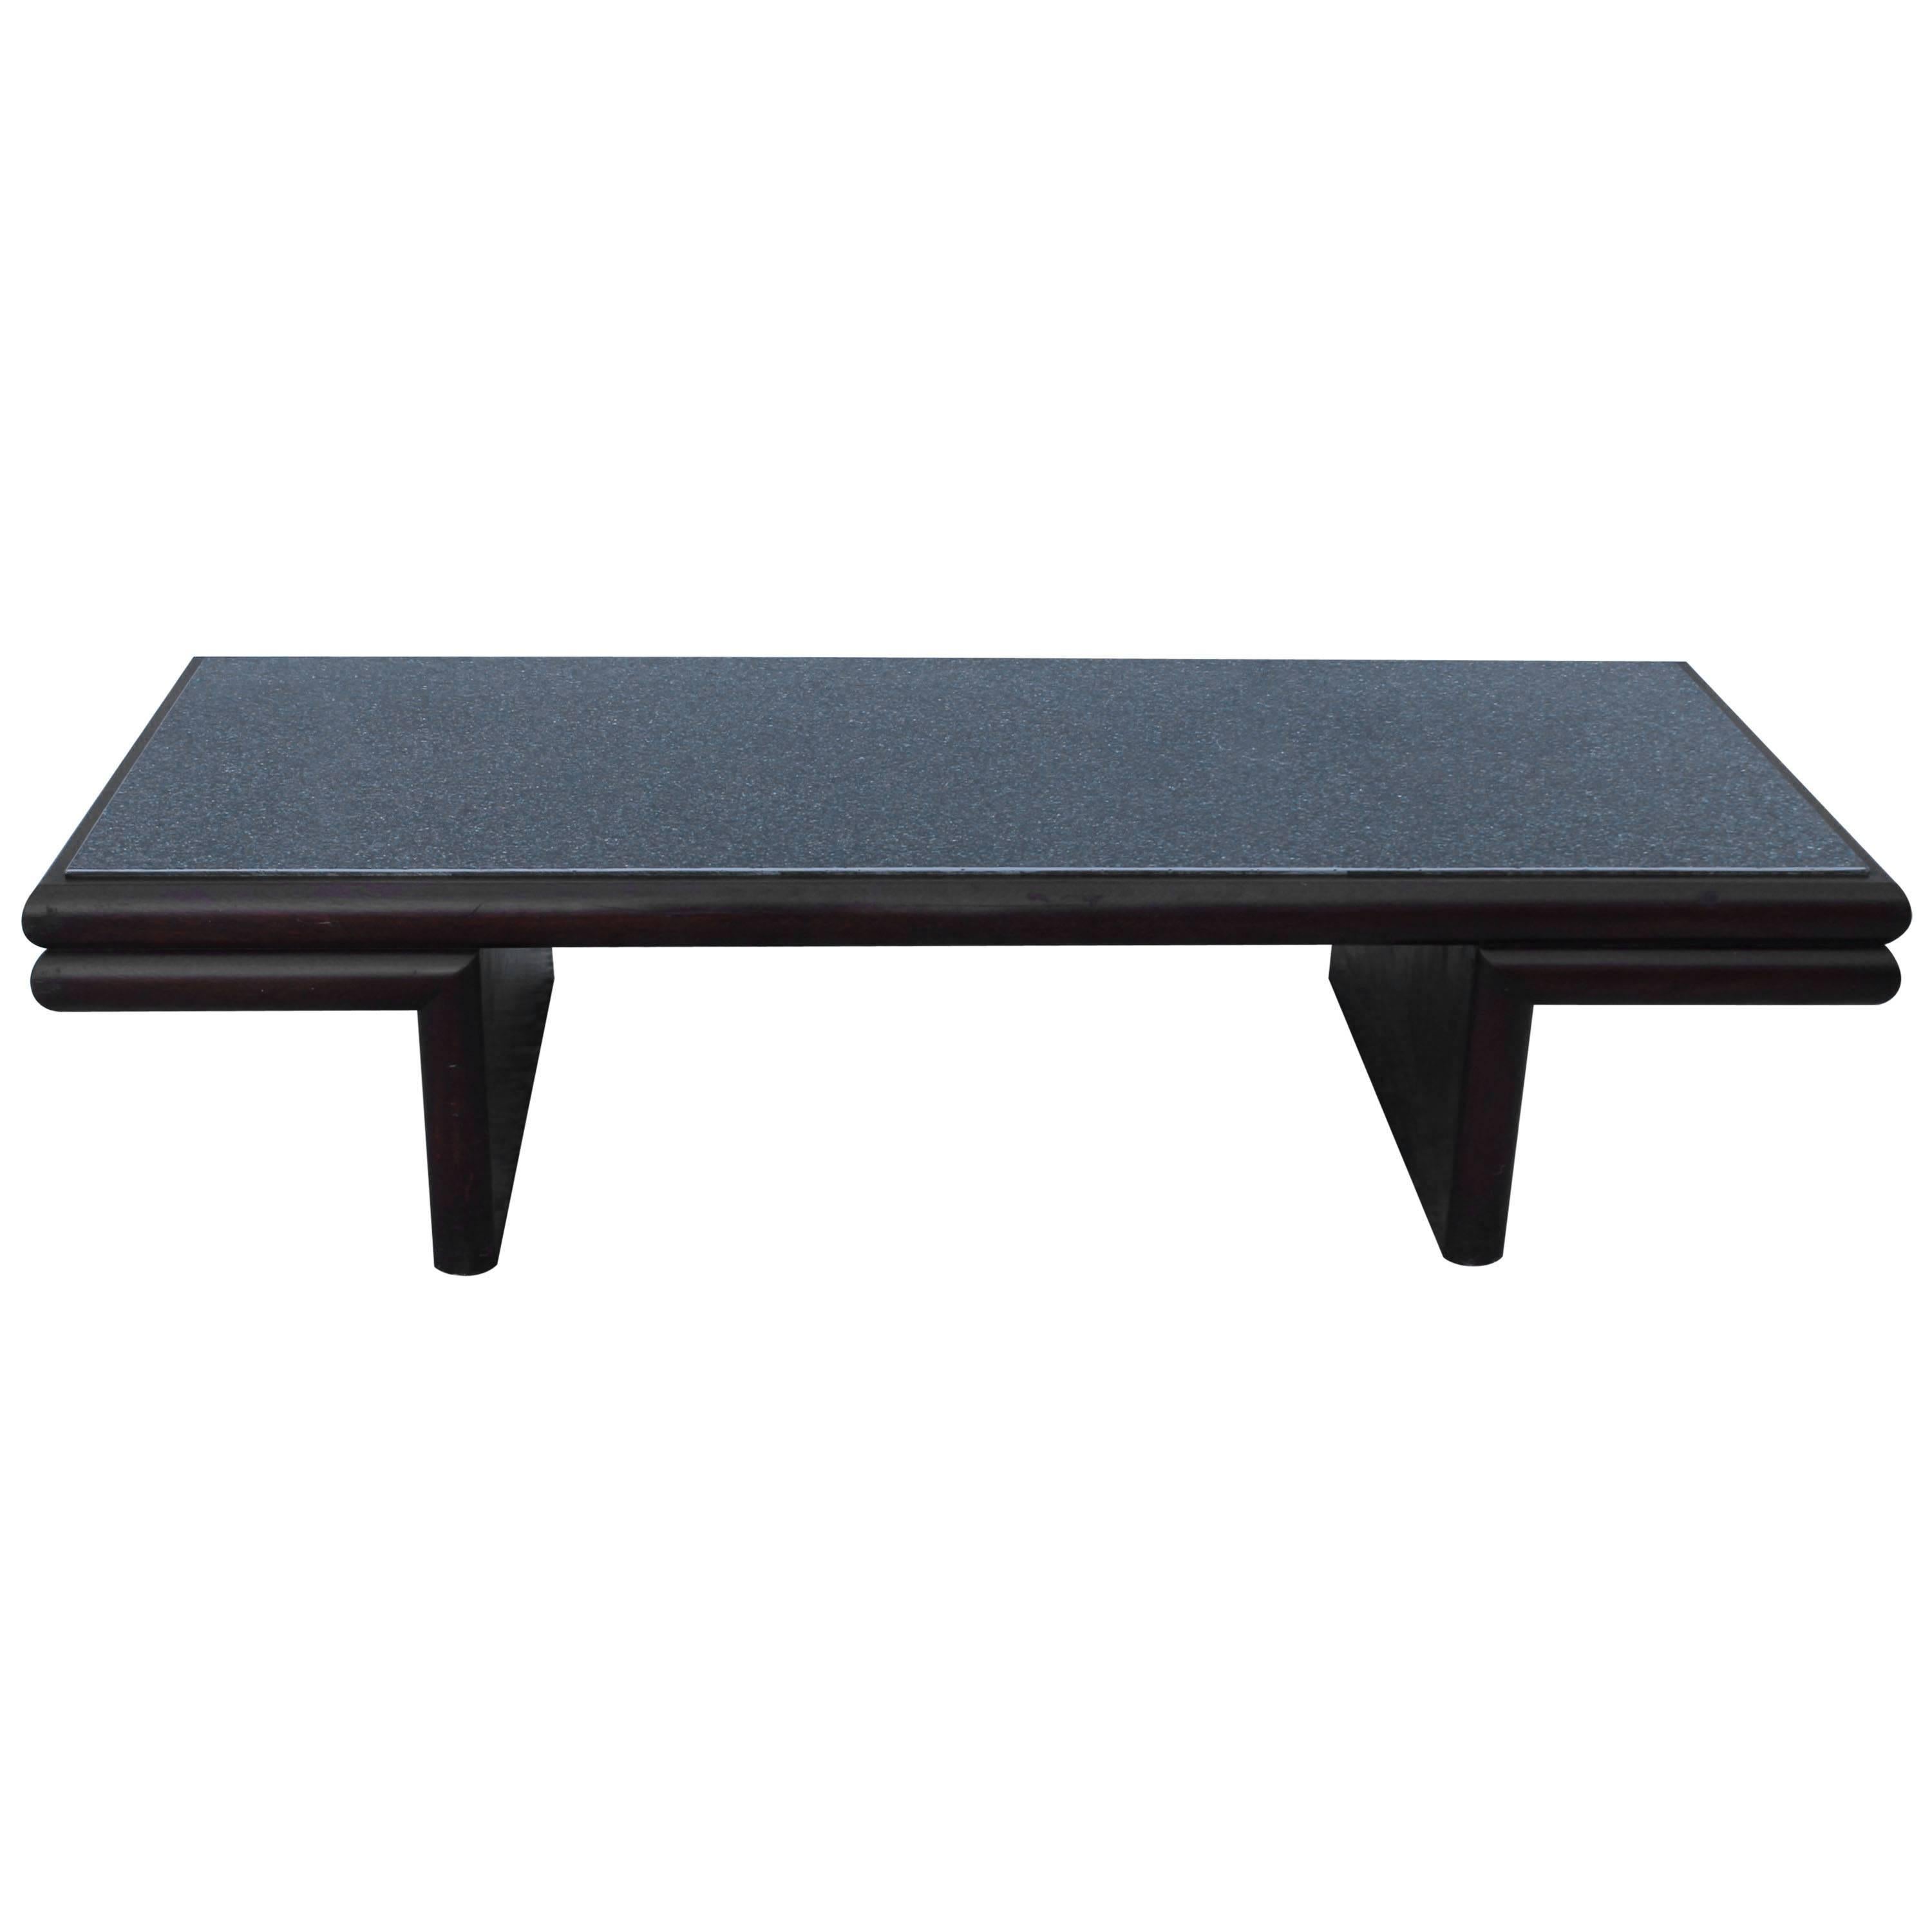 Harvey Probber Style Resin Top Modernist Coffee Table